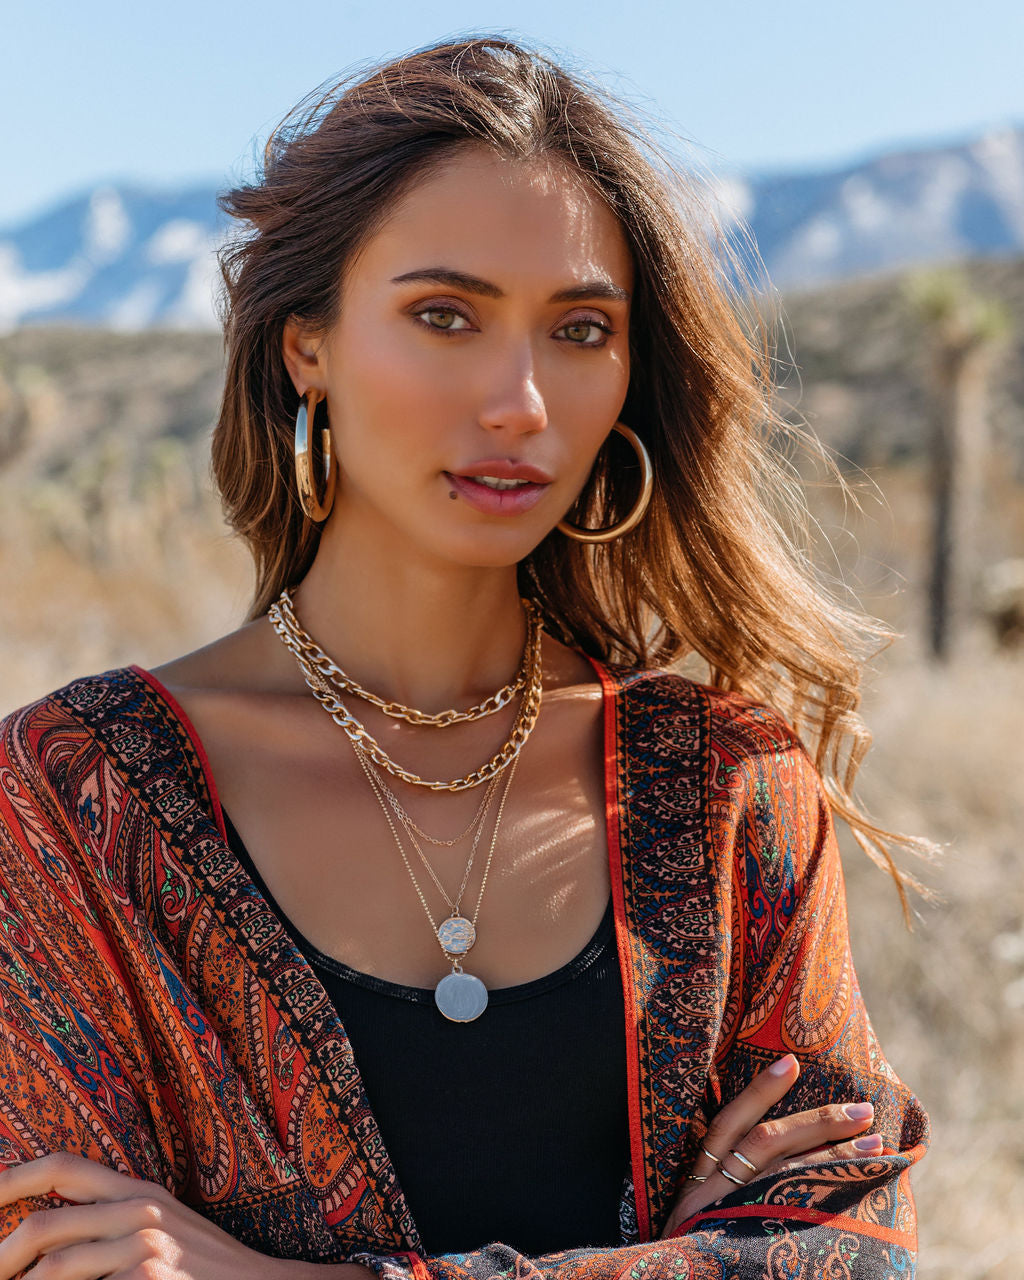 Essential Layers Necklace - Gold Ins Street